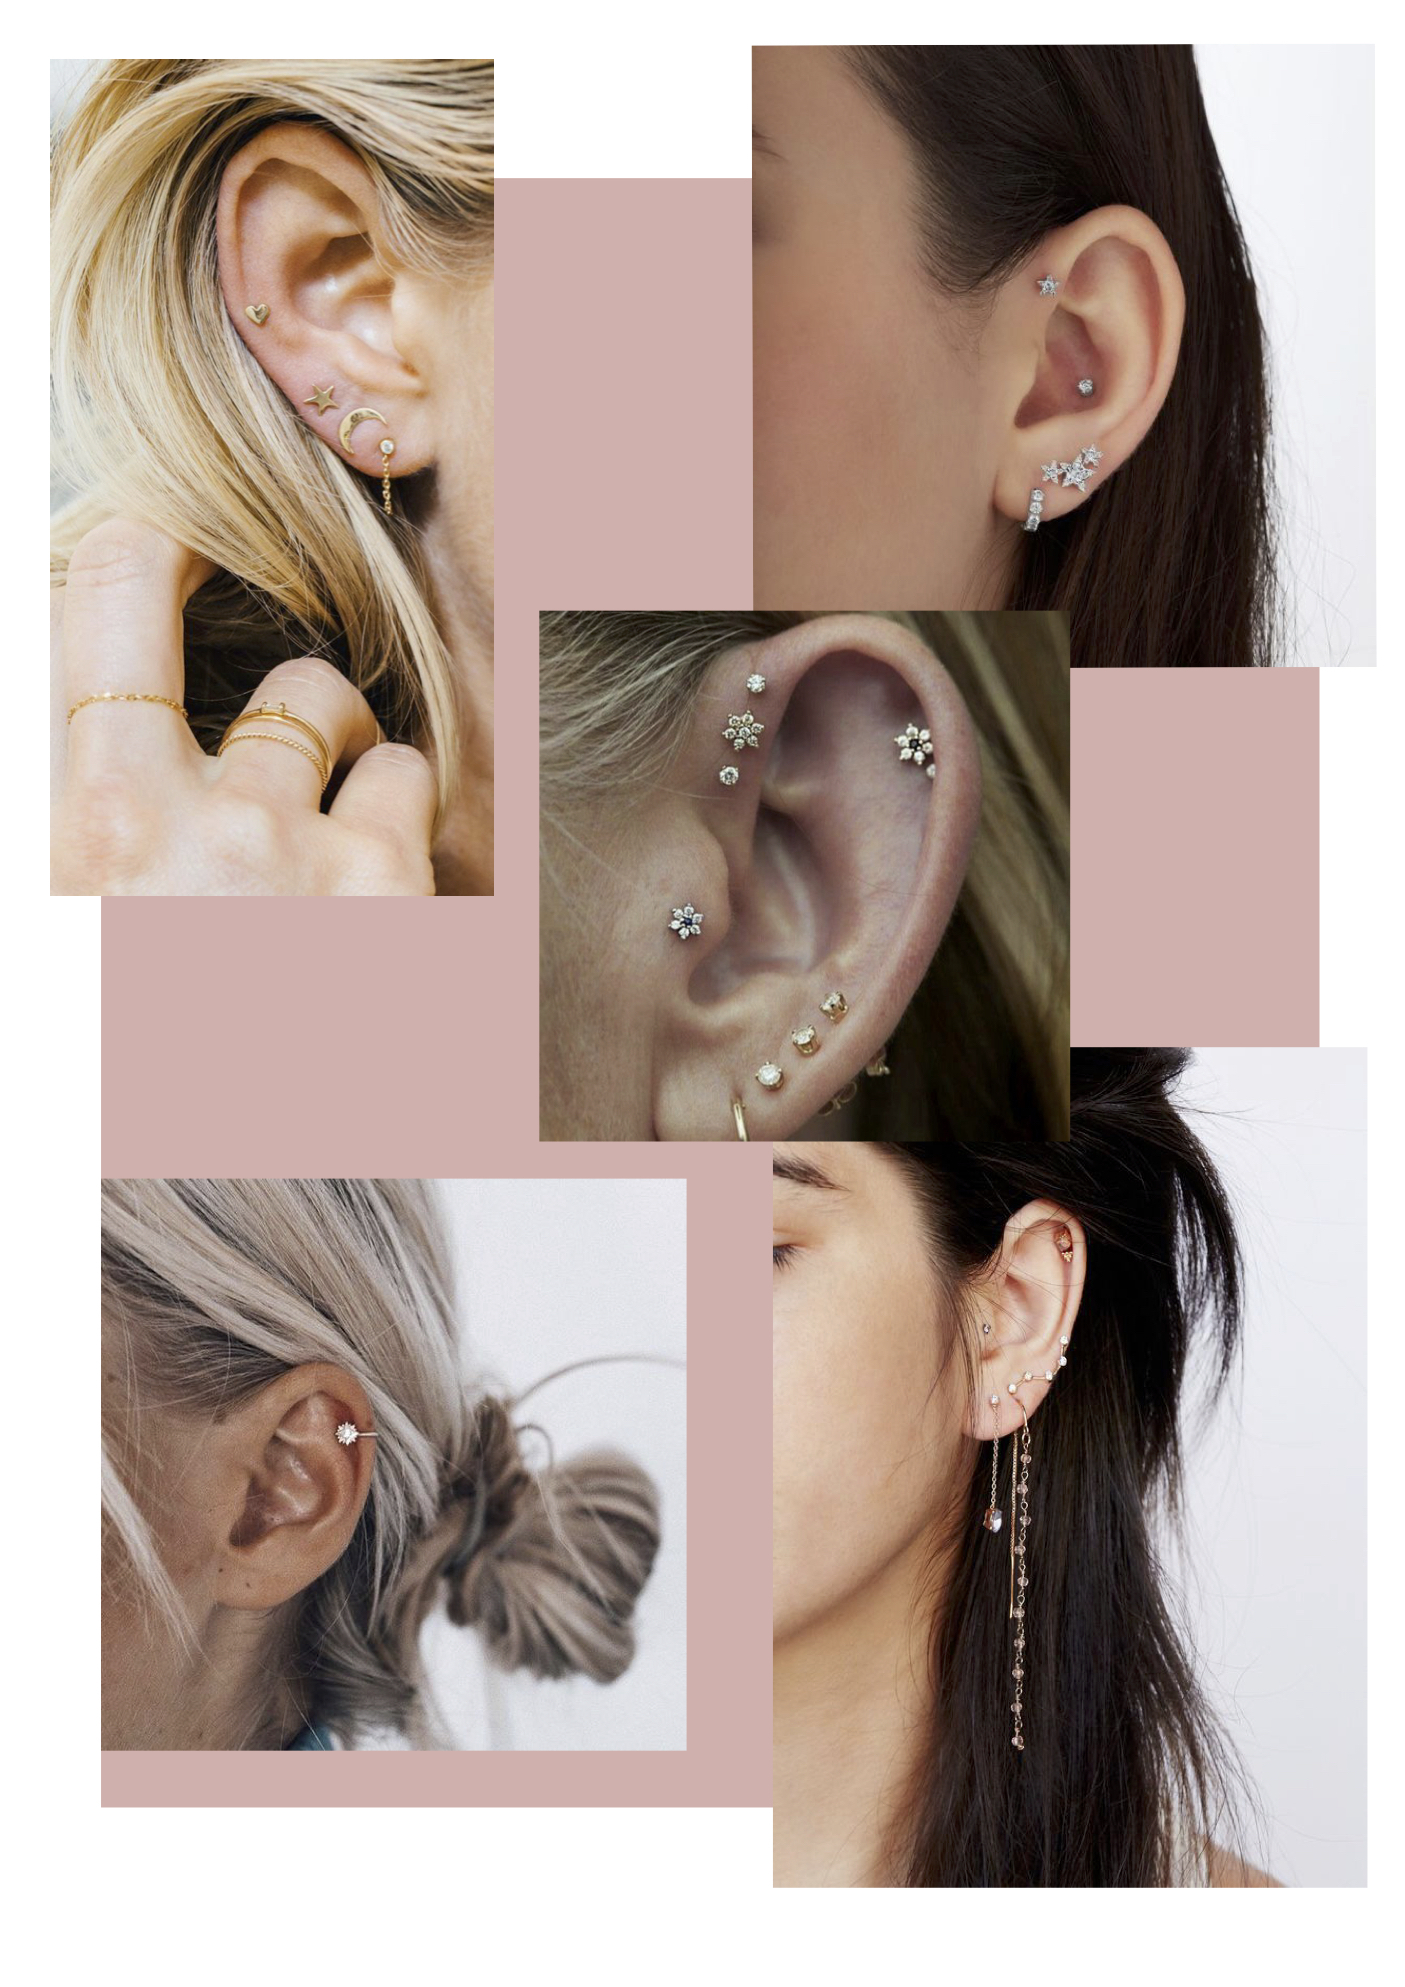 Ear Piercing Diagram The New Piercing Fashion Rules Claire Mina White Lifestyle